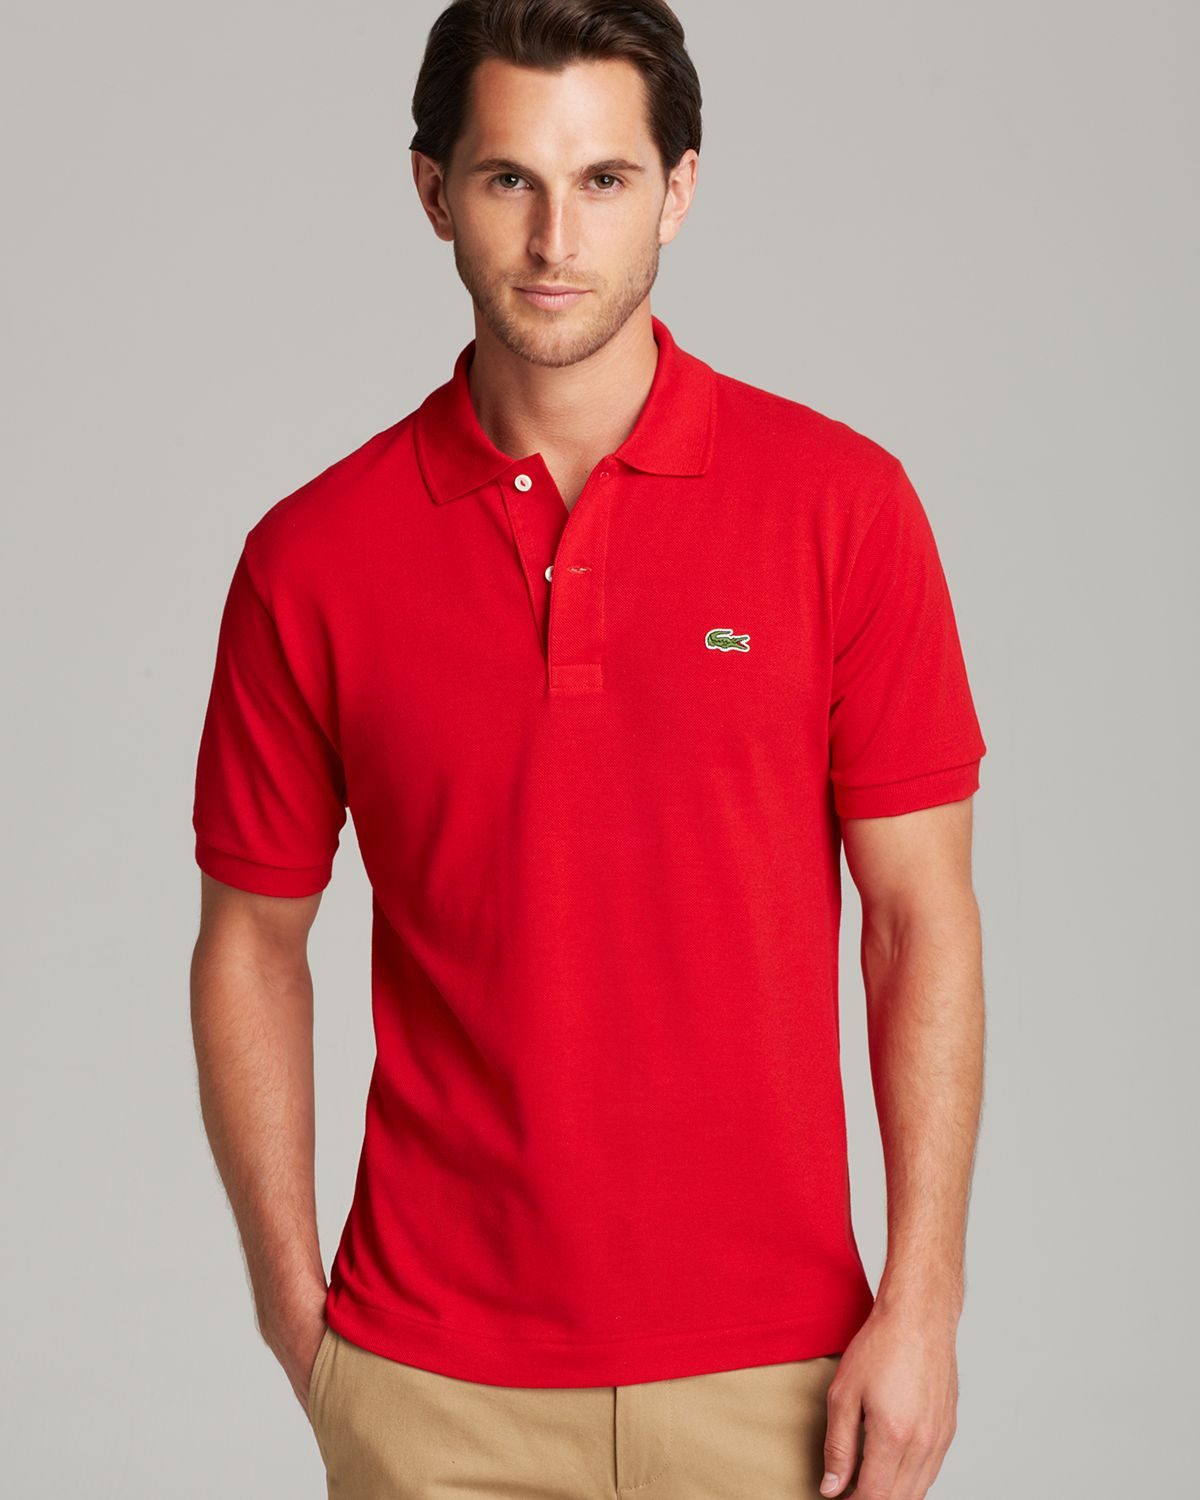 Lyst - Lacoste Short Sleeve Piqué Polo Shirt - Classic Fit in Red for Men